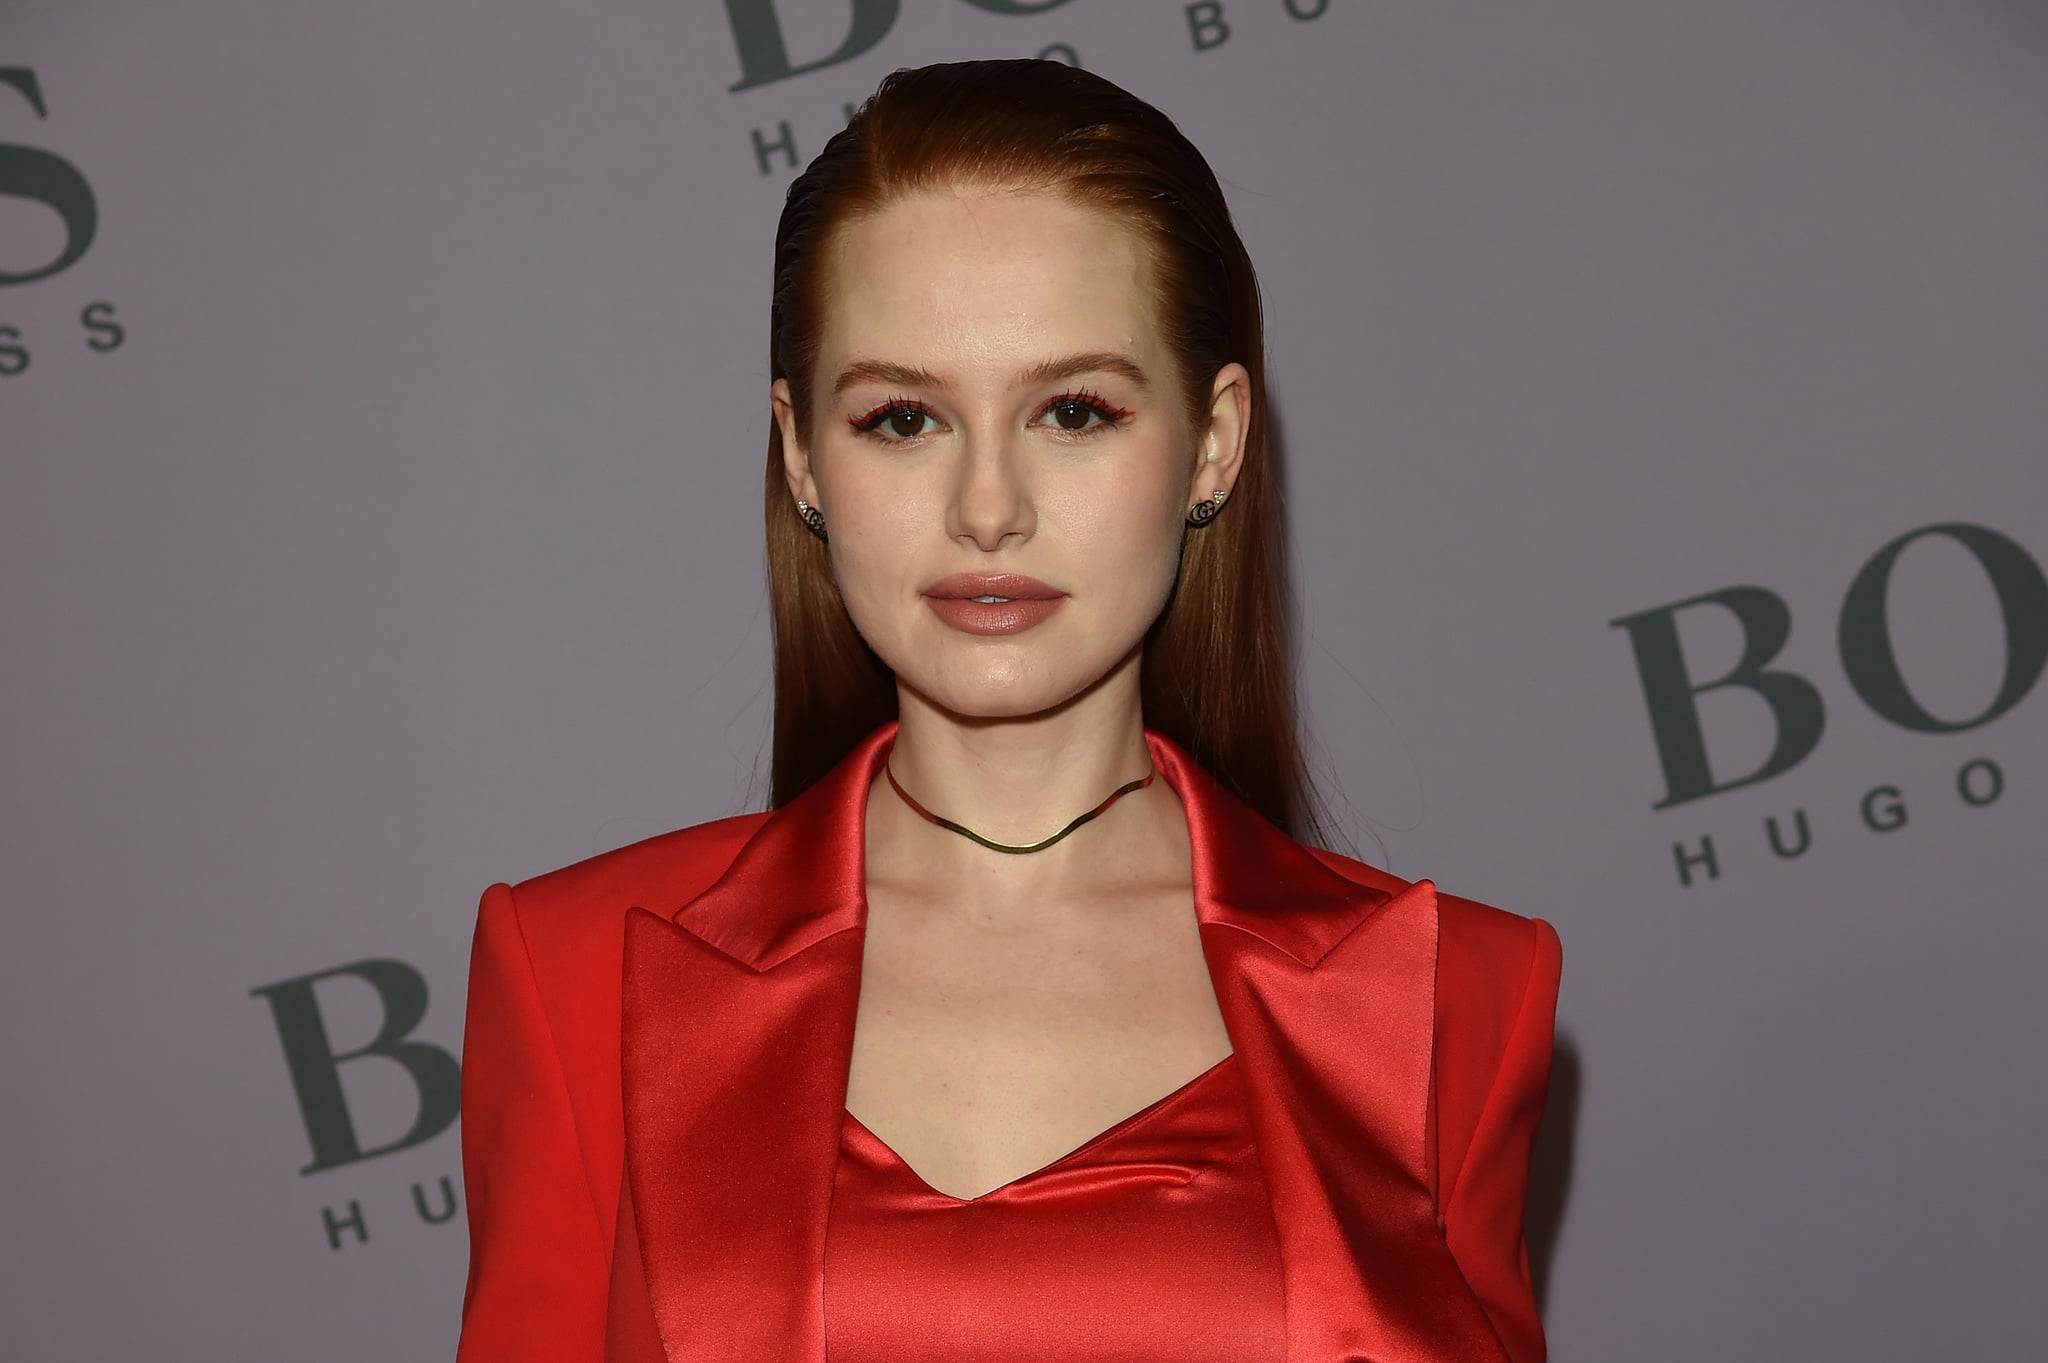 MILAN, ITALY - FEBRUARY 23:  Madelaine Petsch attends the Boss fashion show on February 23, 2020 in Milan, Italy. (Photo by Stefania D'Alessandro/Getty Images)